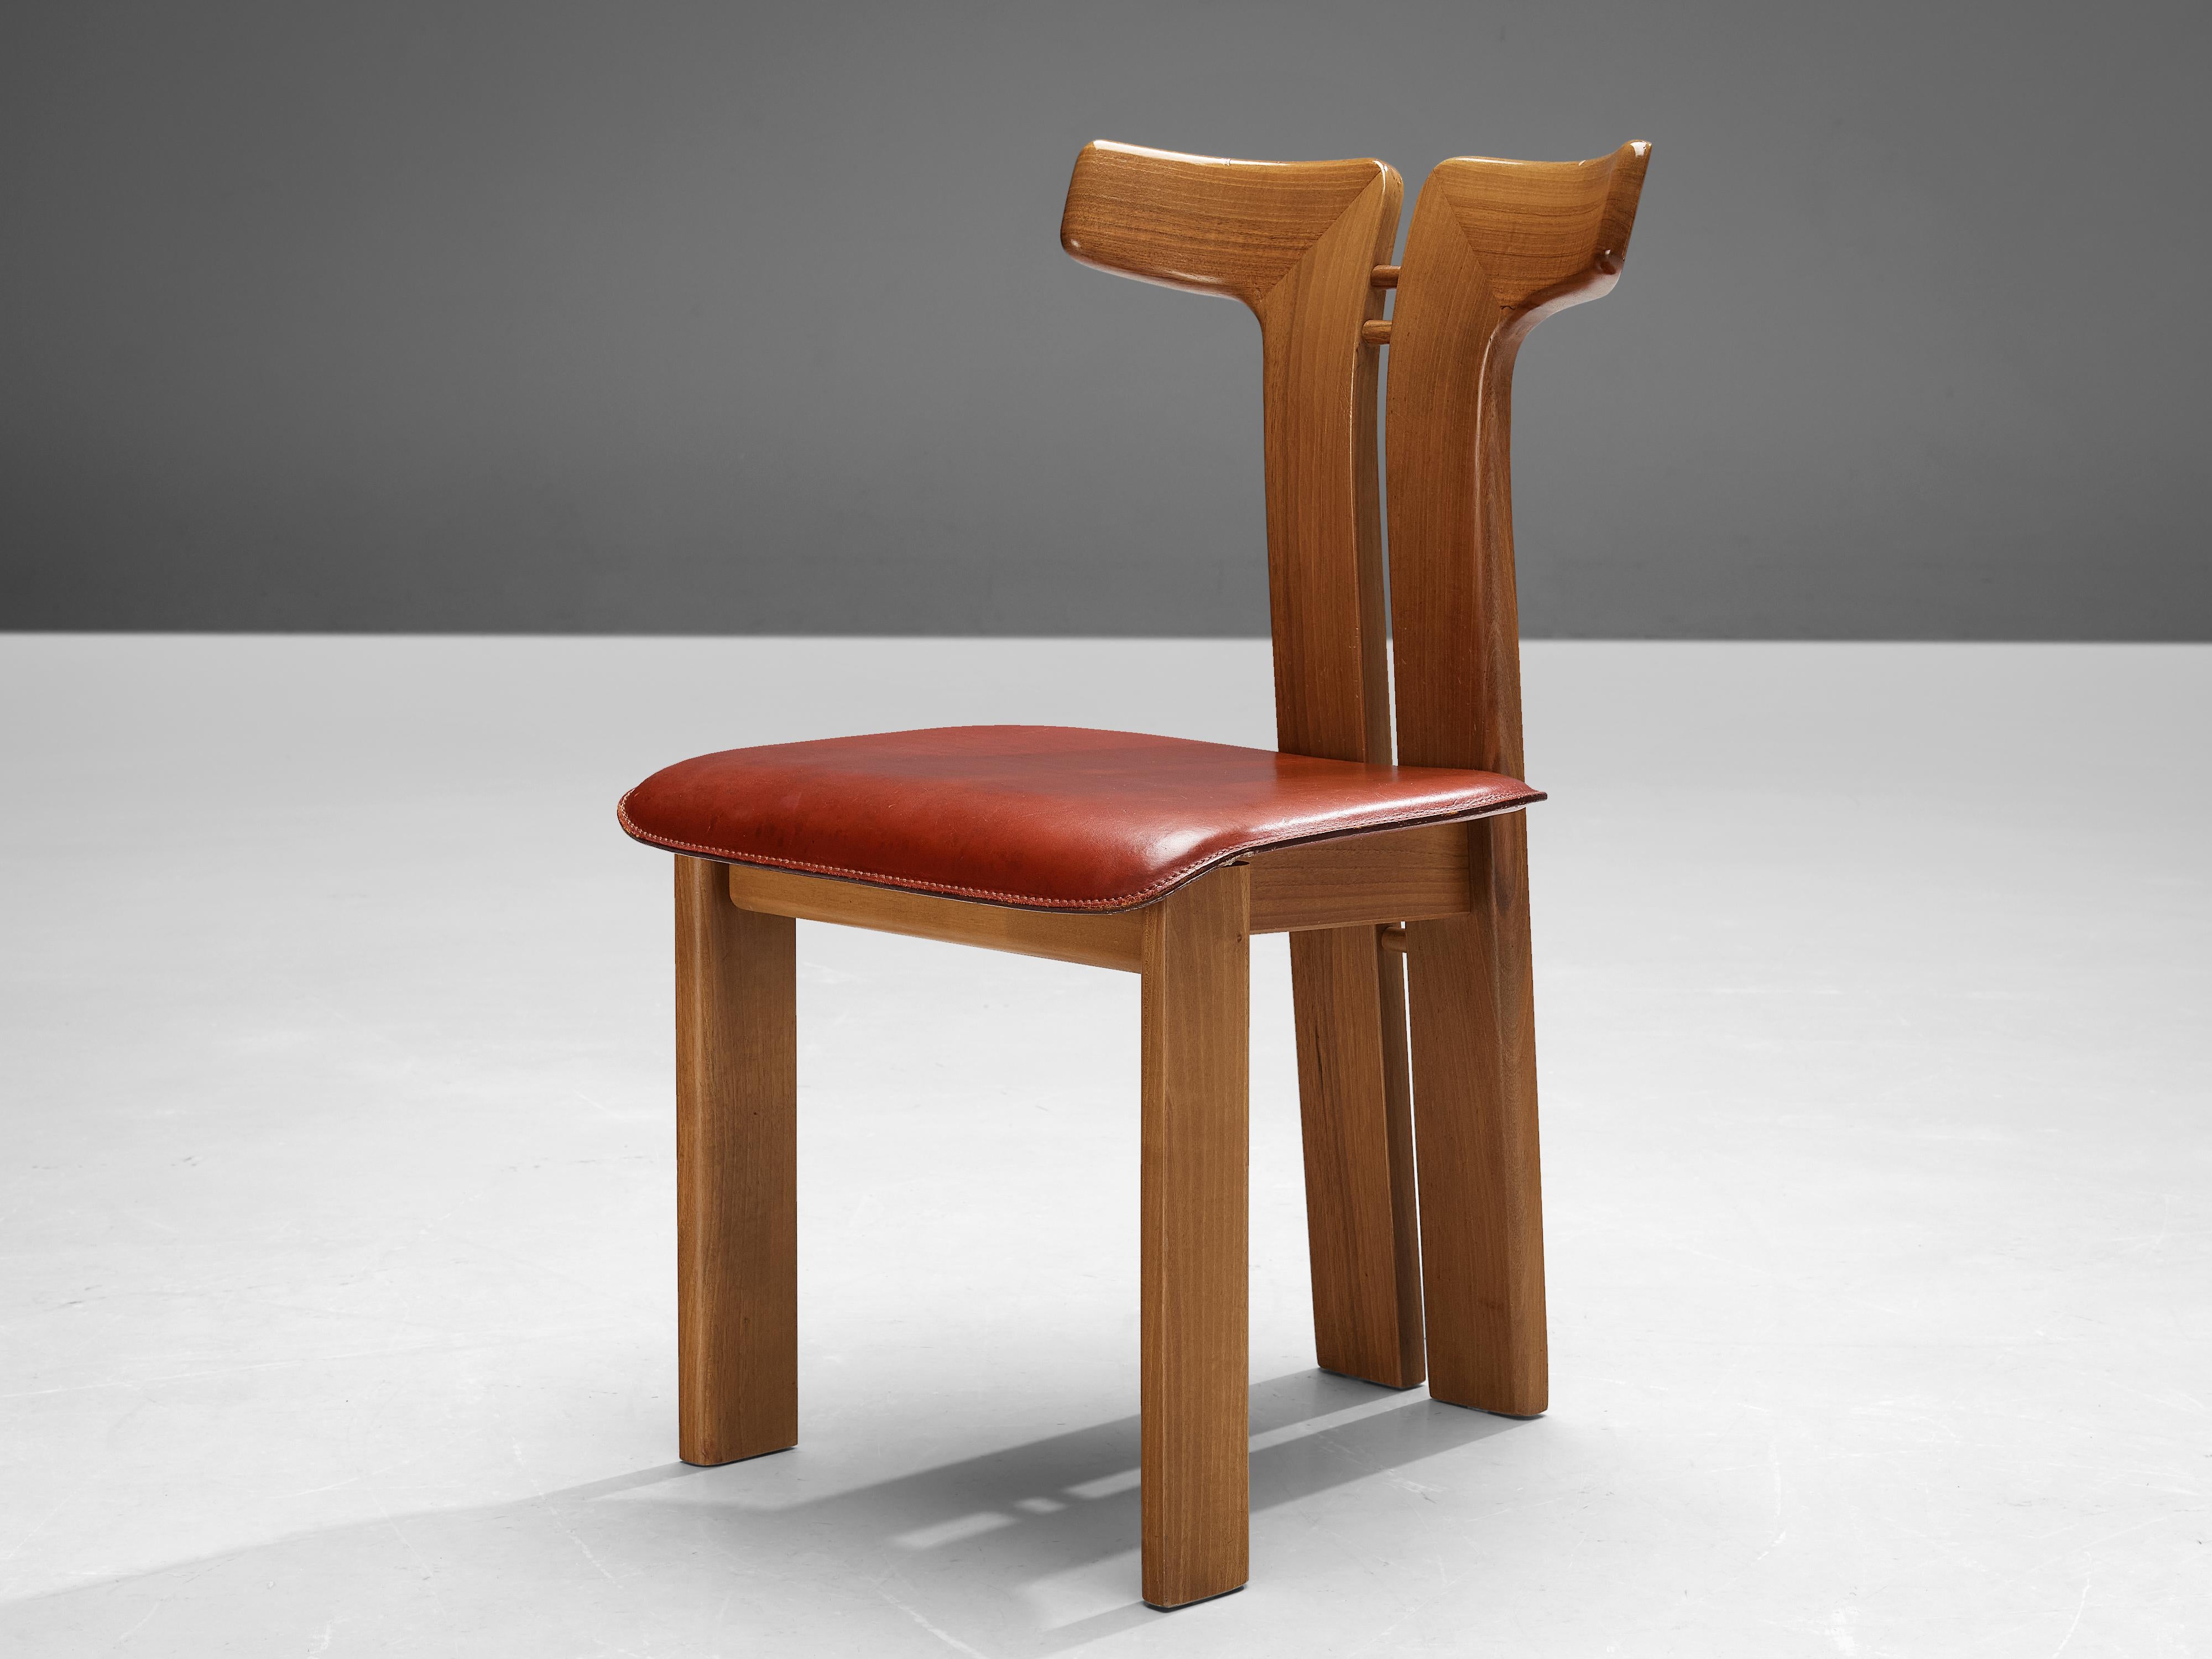 Pierre Cardin, dining chair, walnut, cognac leather, Italy, 1980s 

This sculptural chair is designed by Italian designer Pierre Cardin (1922-2020). The curved back highlights the qualities of the wood and its shape in an unparalleled manner.